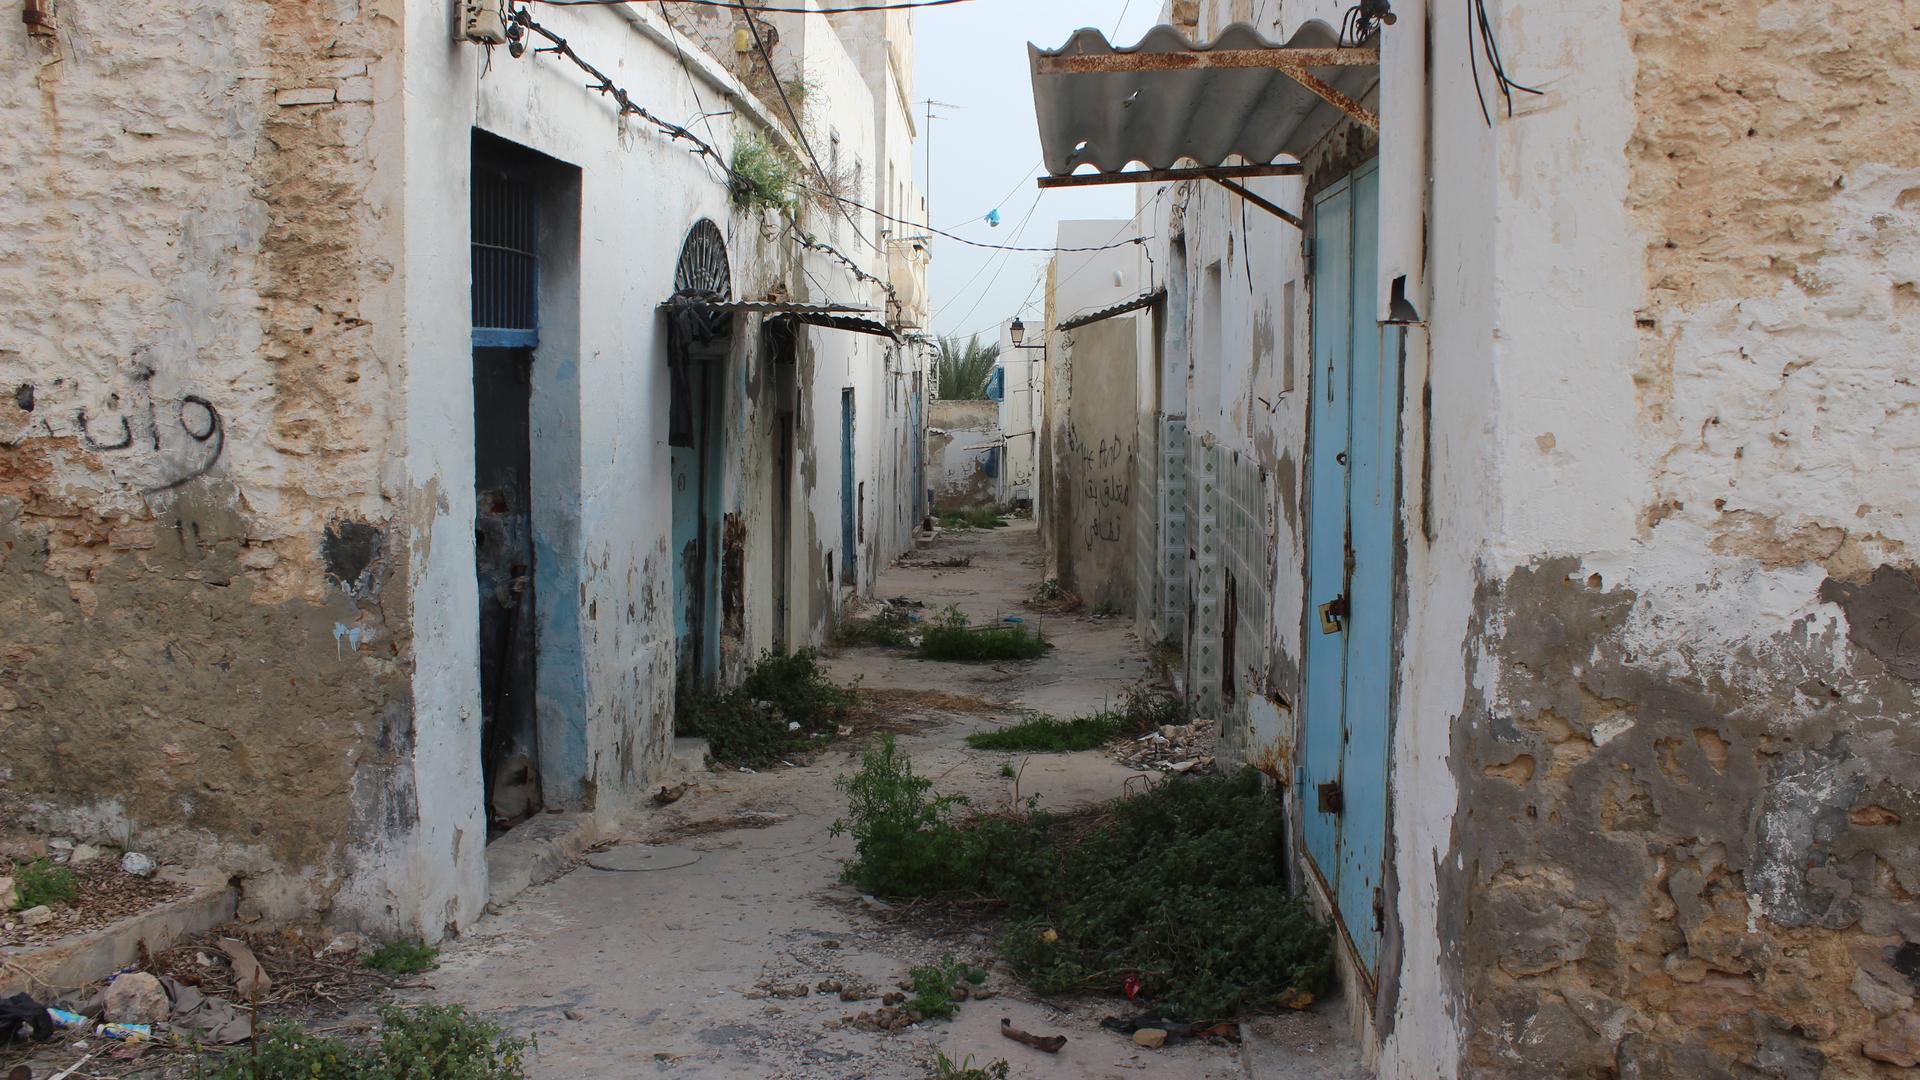 In Sousse’s old town, the former red light district stands derelict and abandoned. Patches of wild grass have lodged in the midst of trash and rubble. “Go away,” reads the graffiti in Arabic painted on the walls.